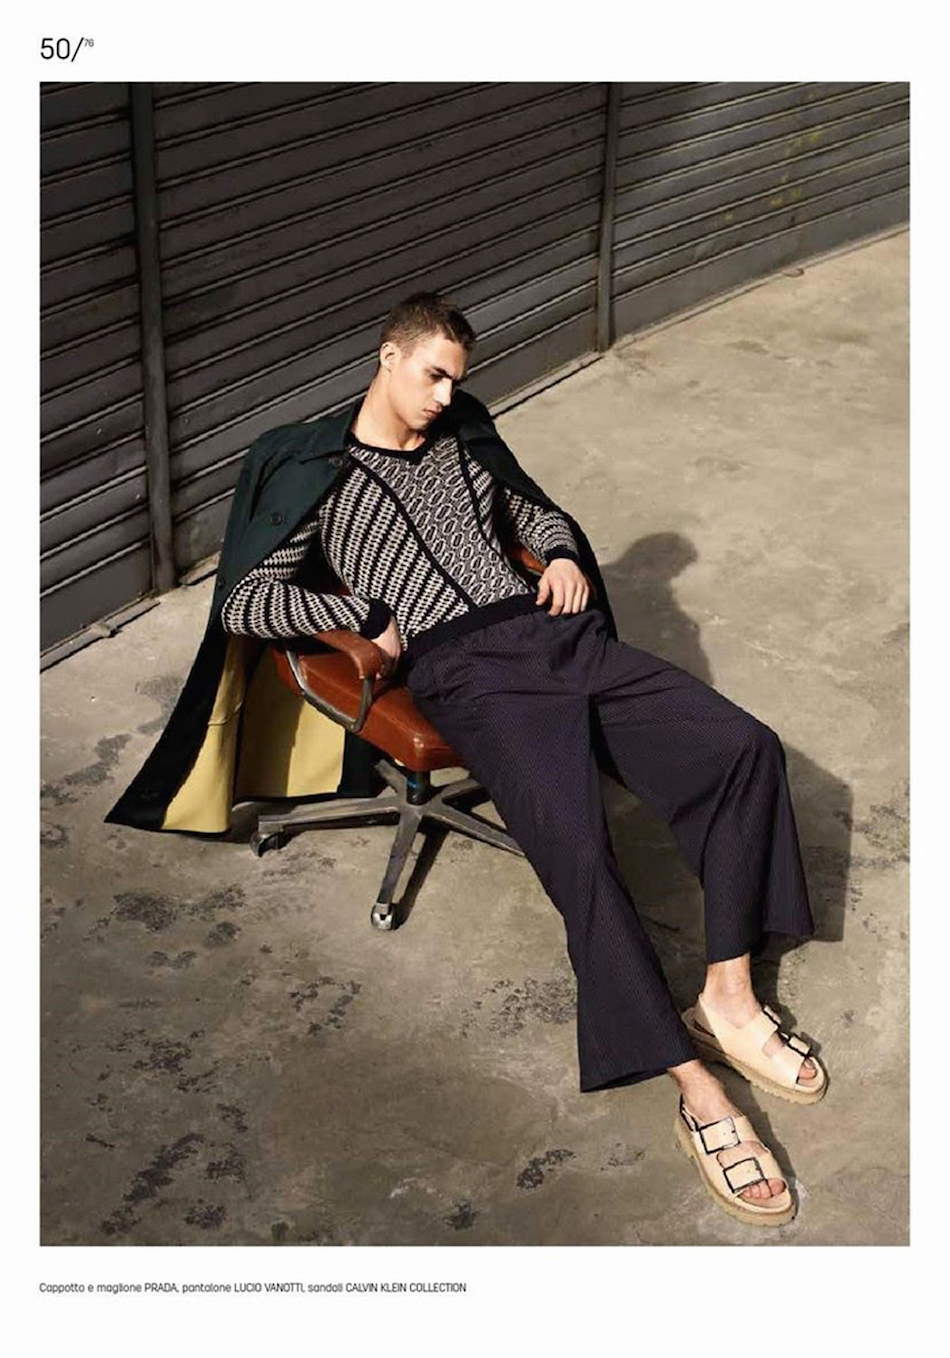 Alessio Pozzi Models Relaxed Menswear Styles for Urban Cover Shoot